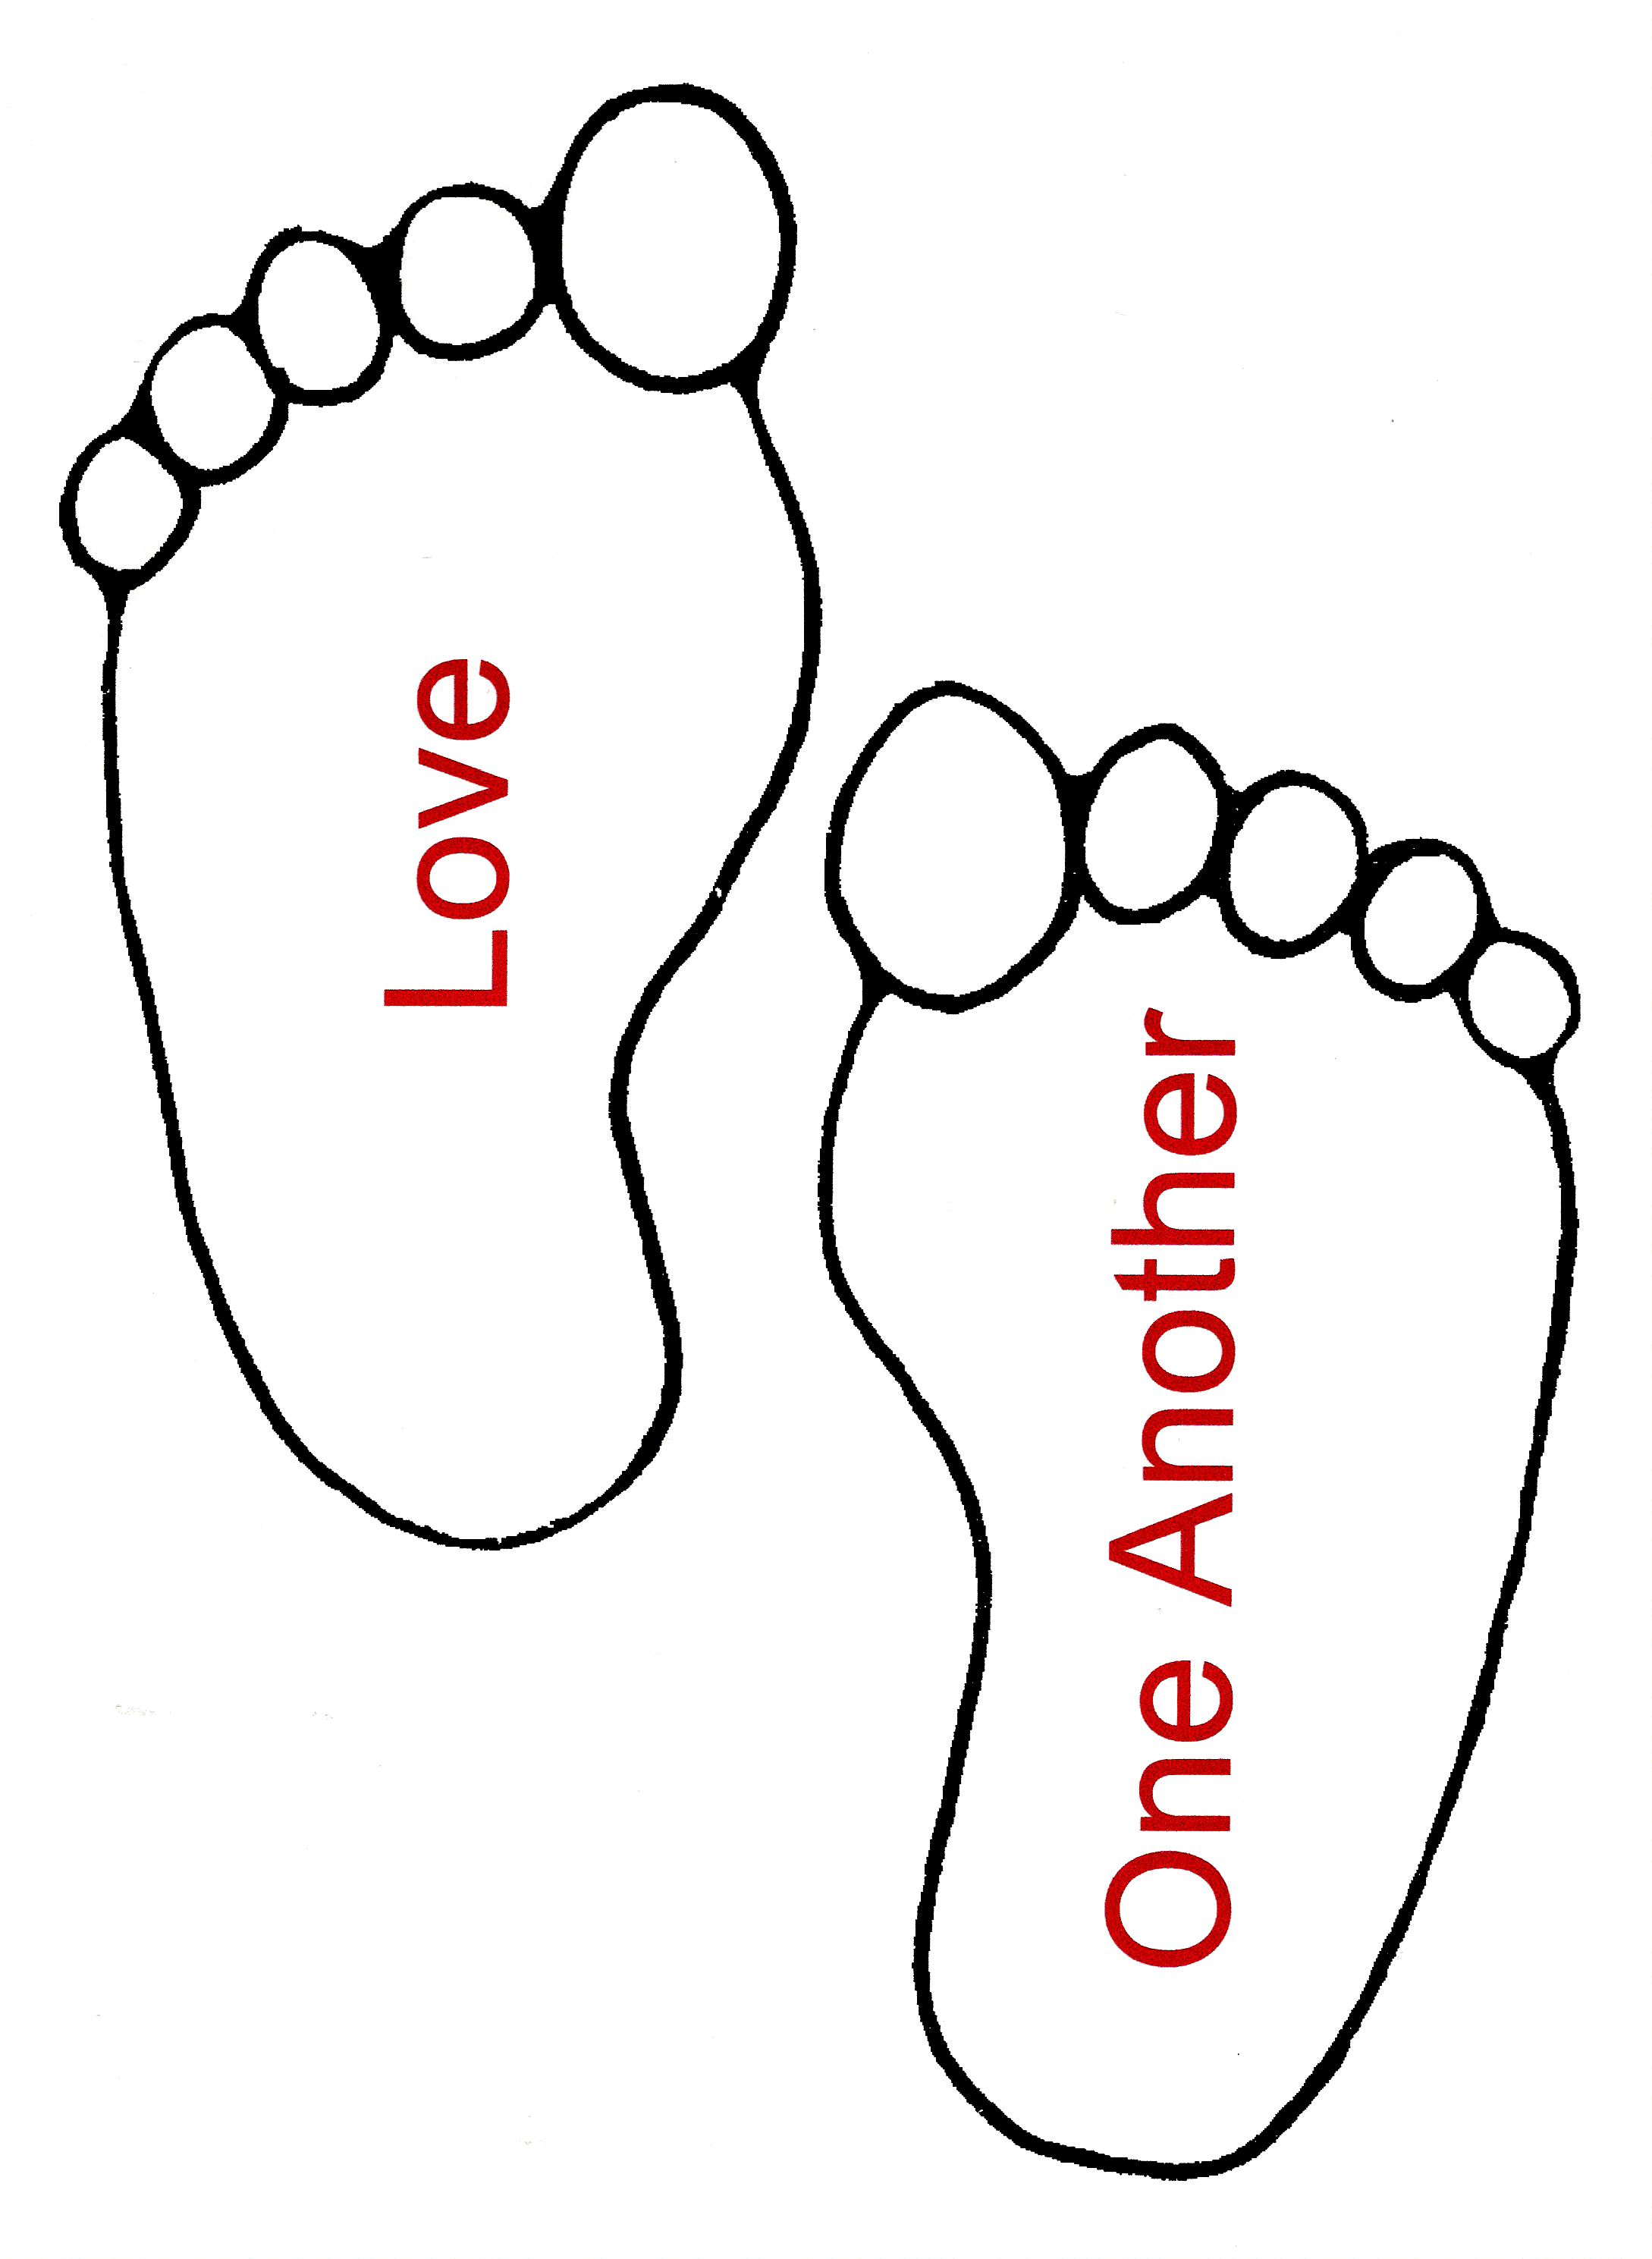 Mormon Share   Love One Another   Ctr A 15   Love One Another Foot